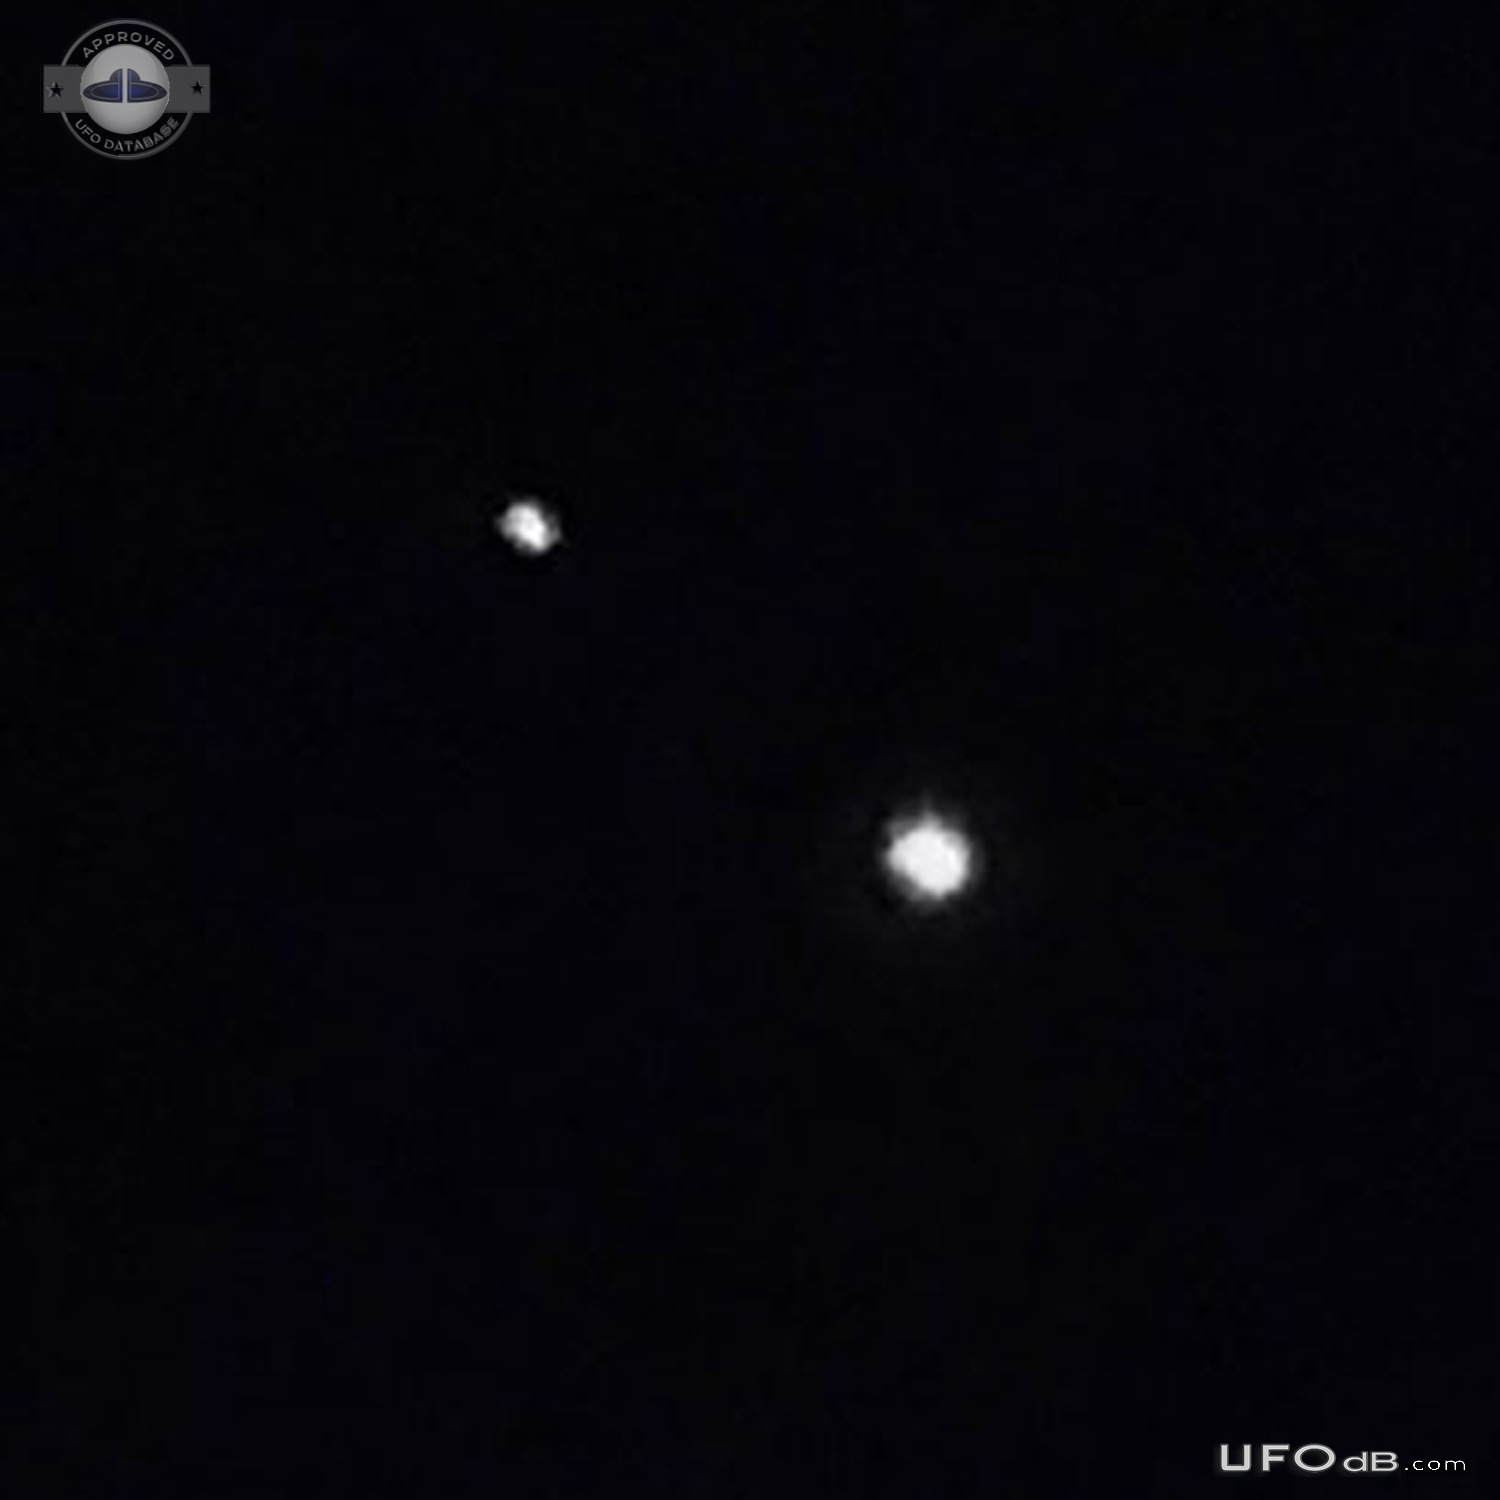 2 extremely bright lit objects stationary in sky for lenghthy period UFO Picture #744-2